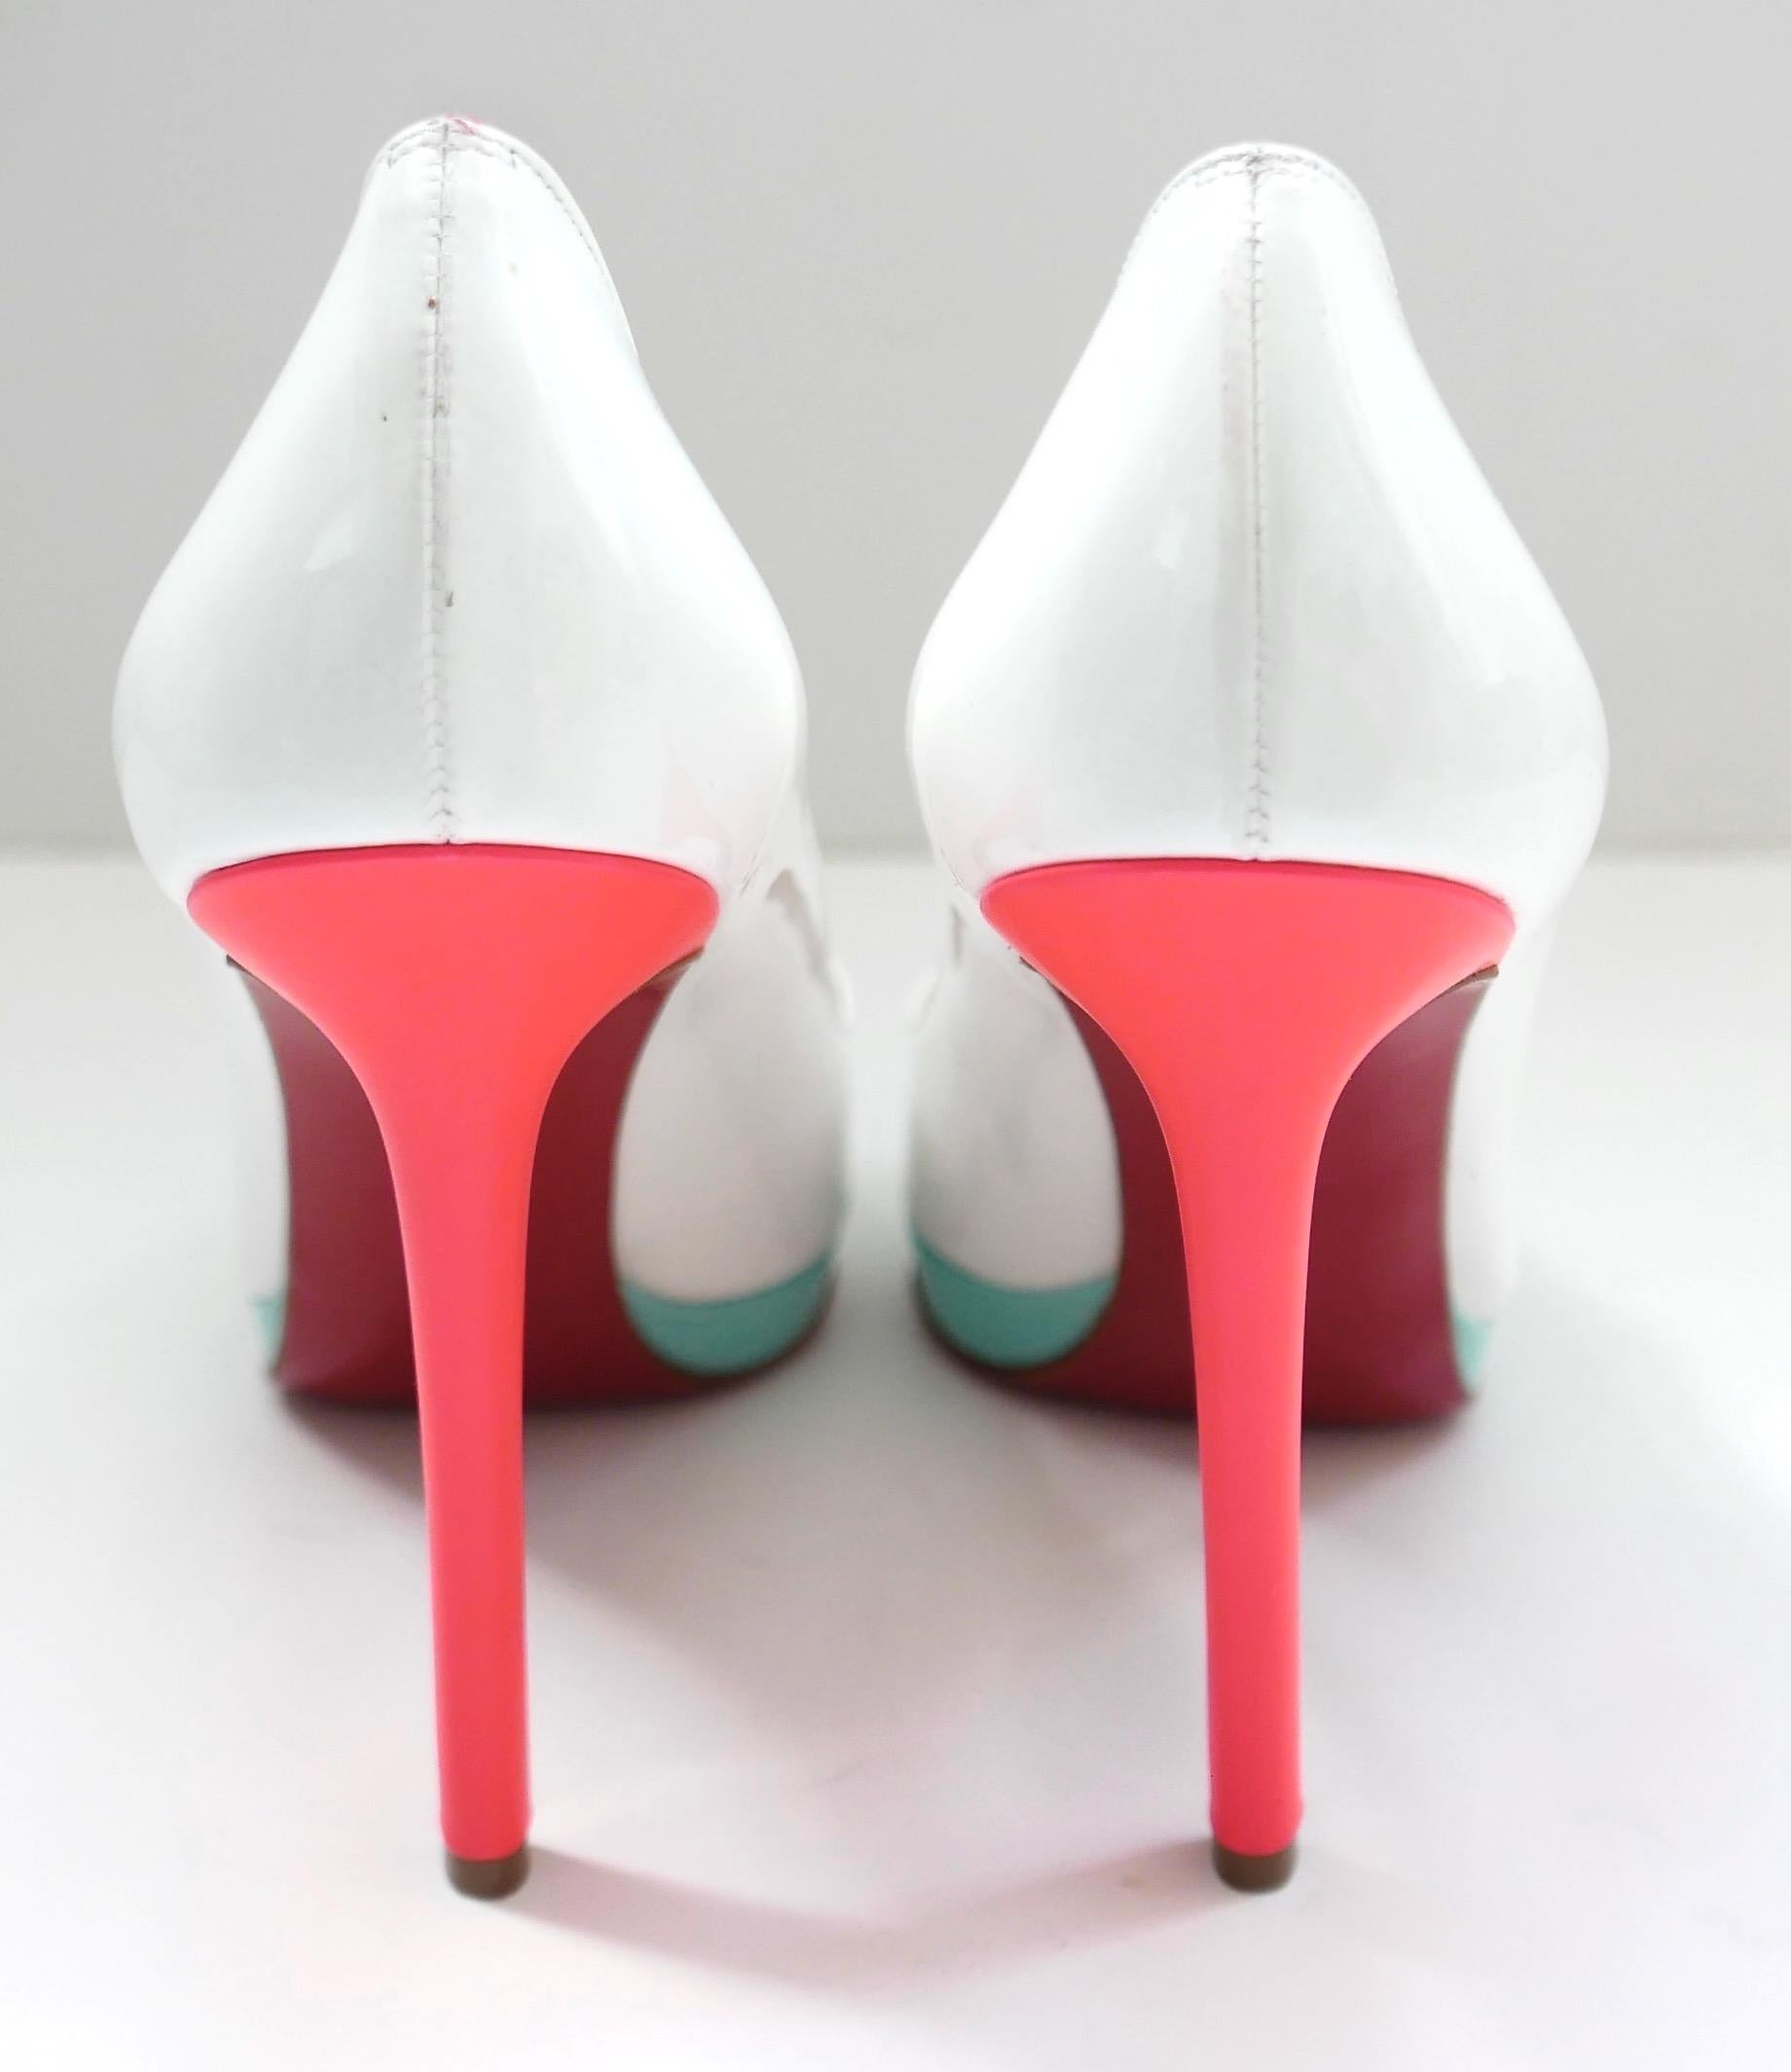 Super cool Christian Louboutin Pigalle Plato heels in white patent leather with neon pink heels and slim turquoise platform. Size 36.5. Measure approx - 10” heel to toe inside and heel is 4.5”. Unworn but do have a few marks form storage. Come with